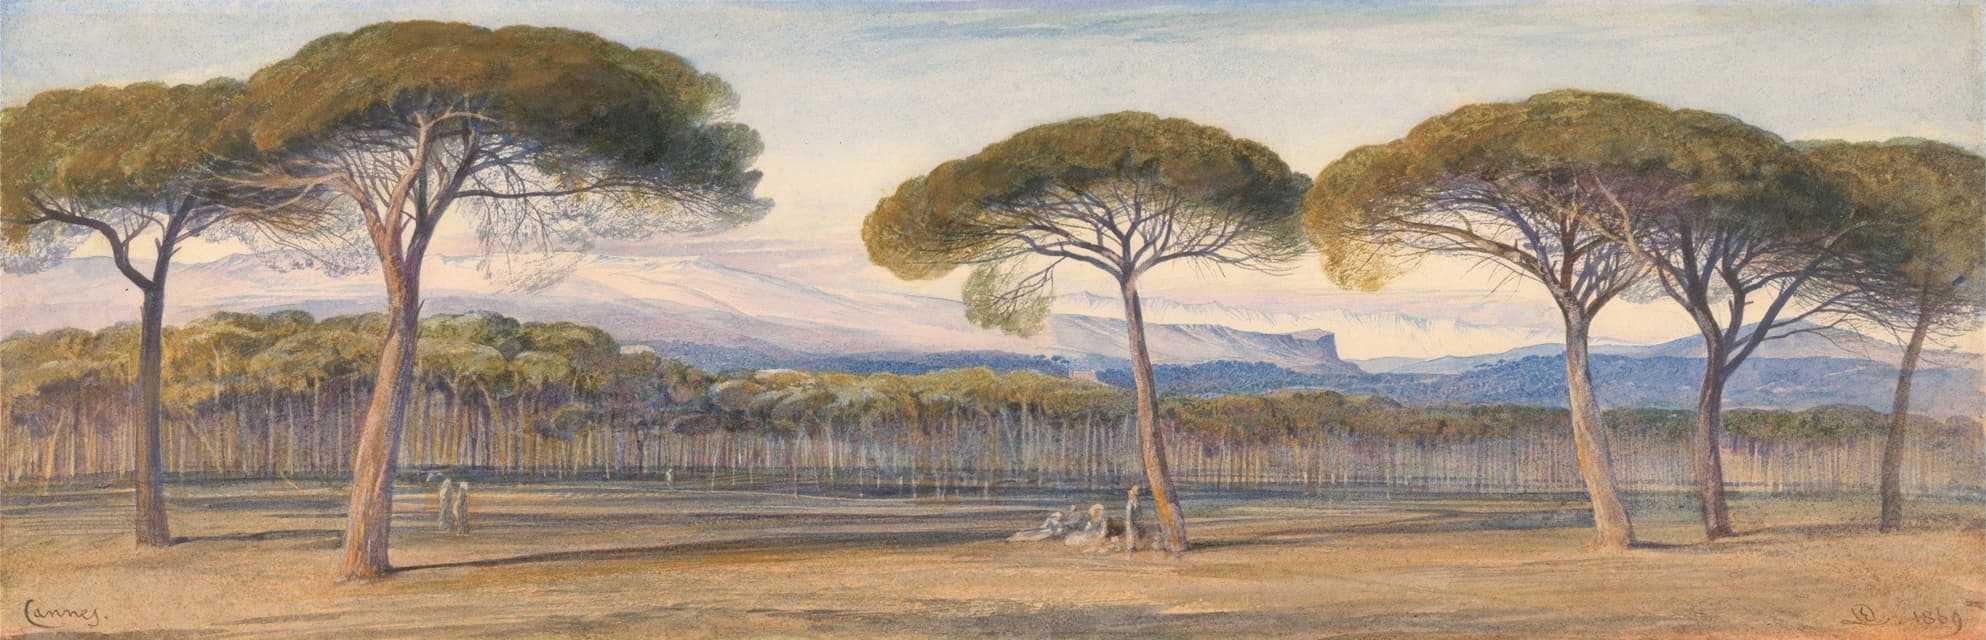 Edward Lear - A View of the Pine Woods Above Cannes